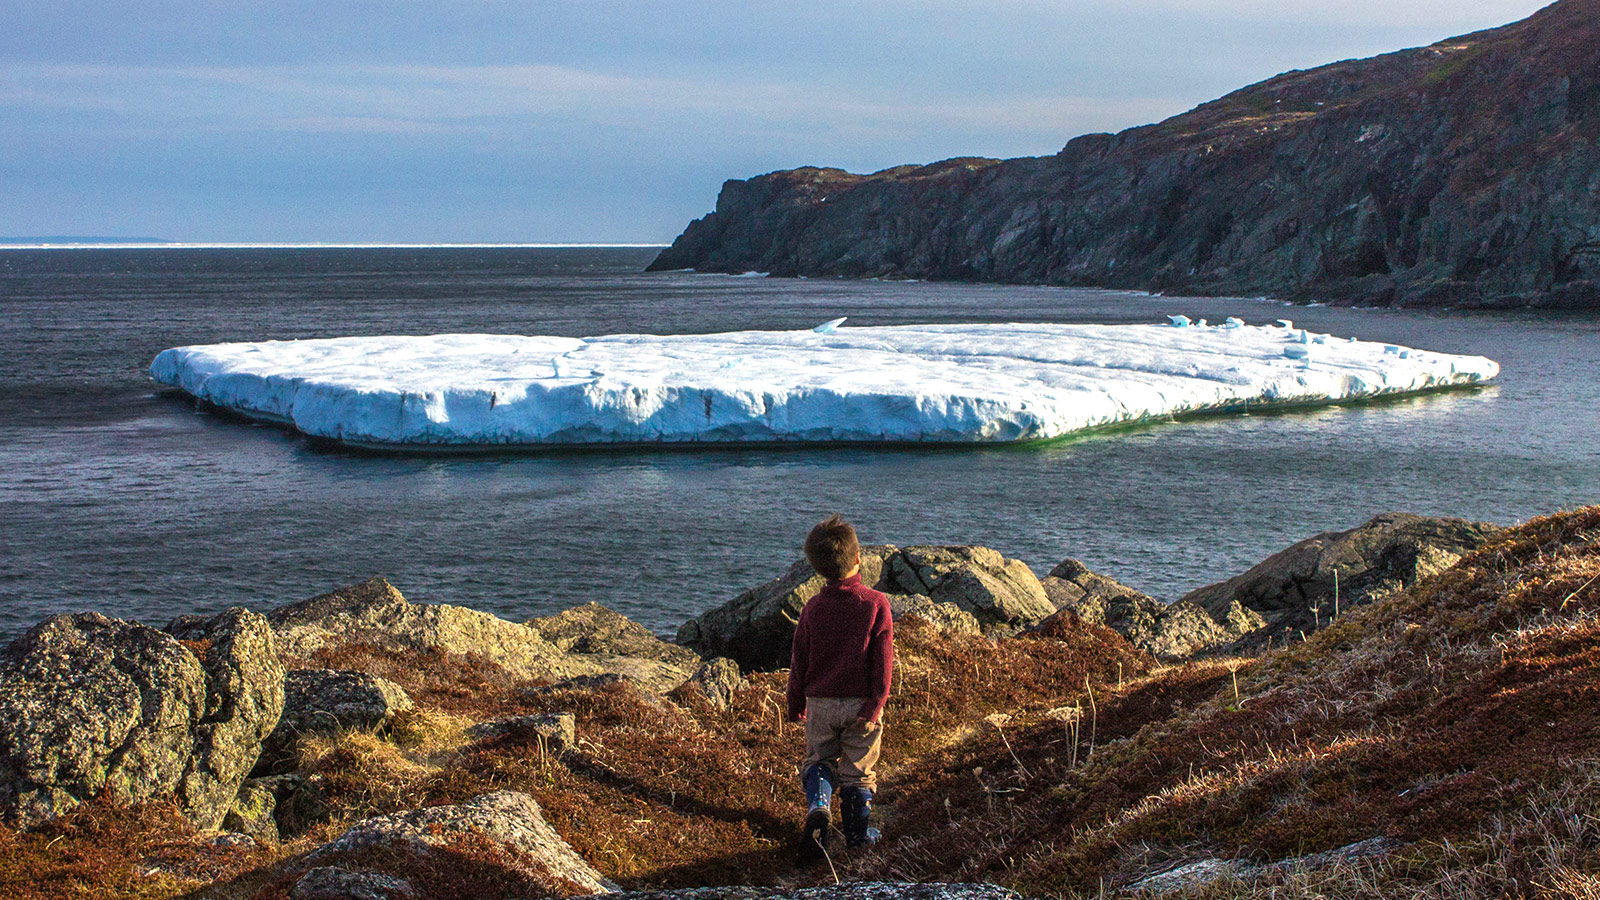 Young boy in red sweater walks along rocky coast towards an iceberg